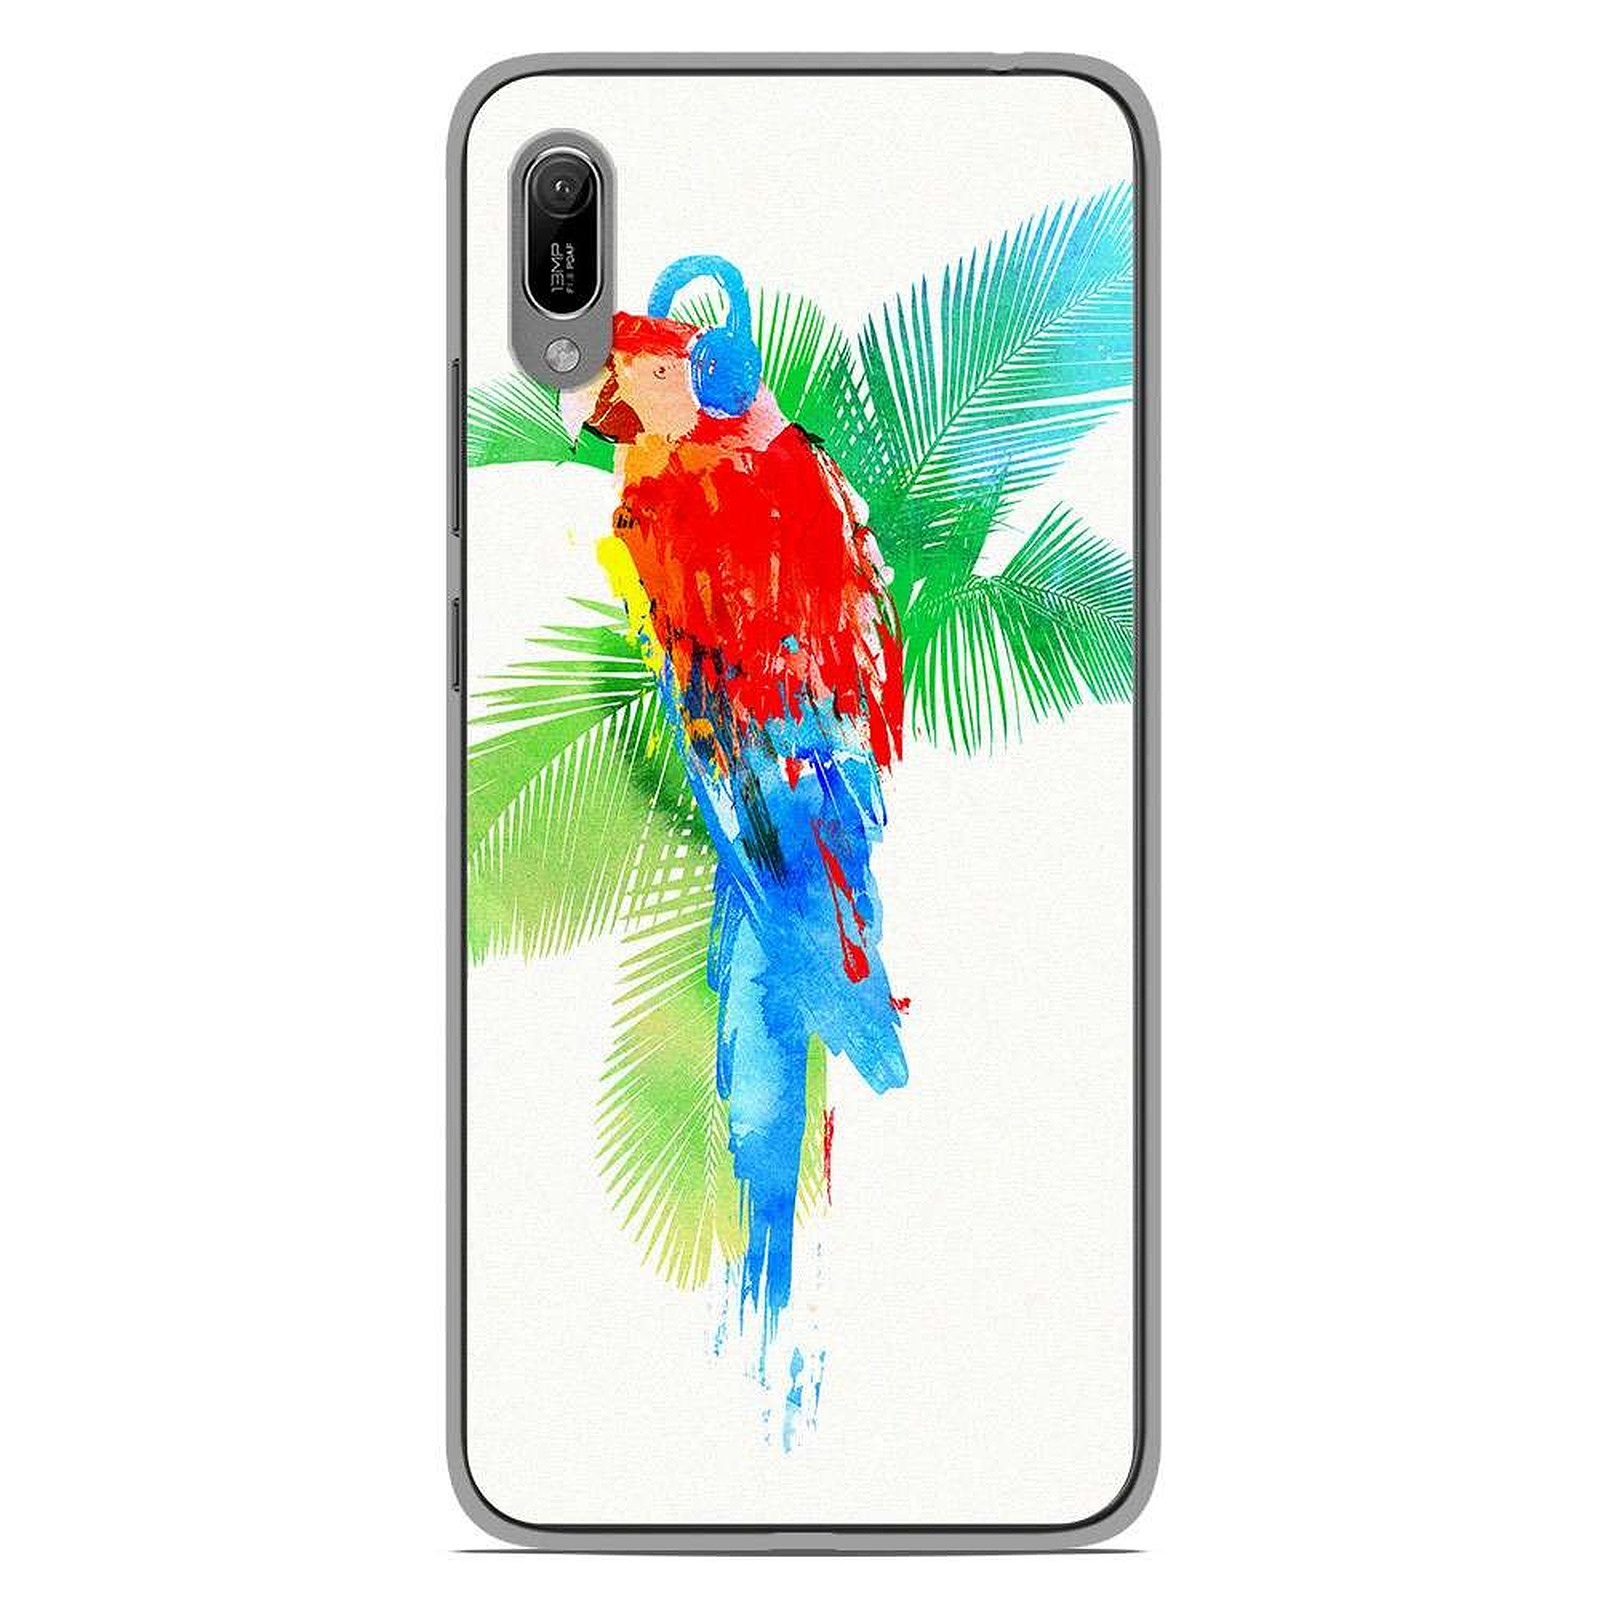 1001 Coques Coque silicone gel Huawei Y6 2019 motif RF Tropical party - Coque telephone 1001Coques